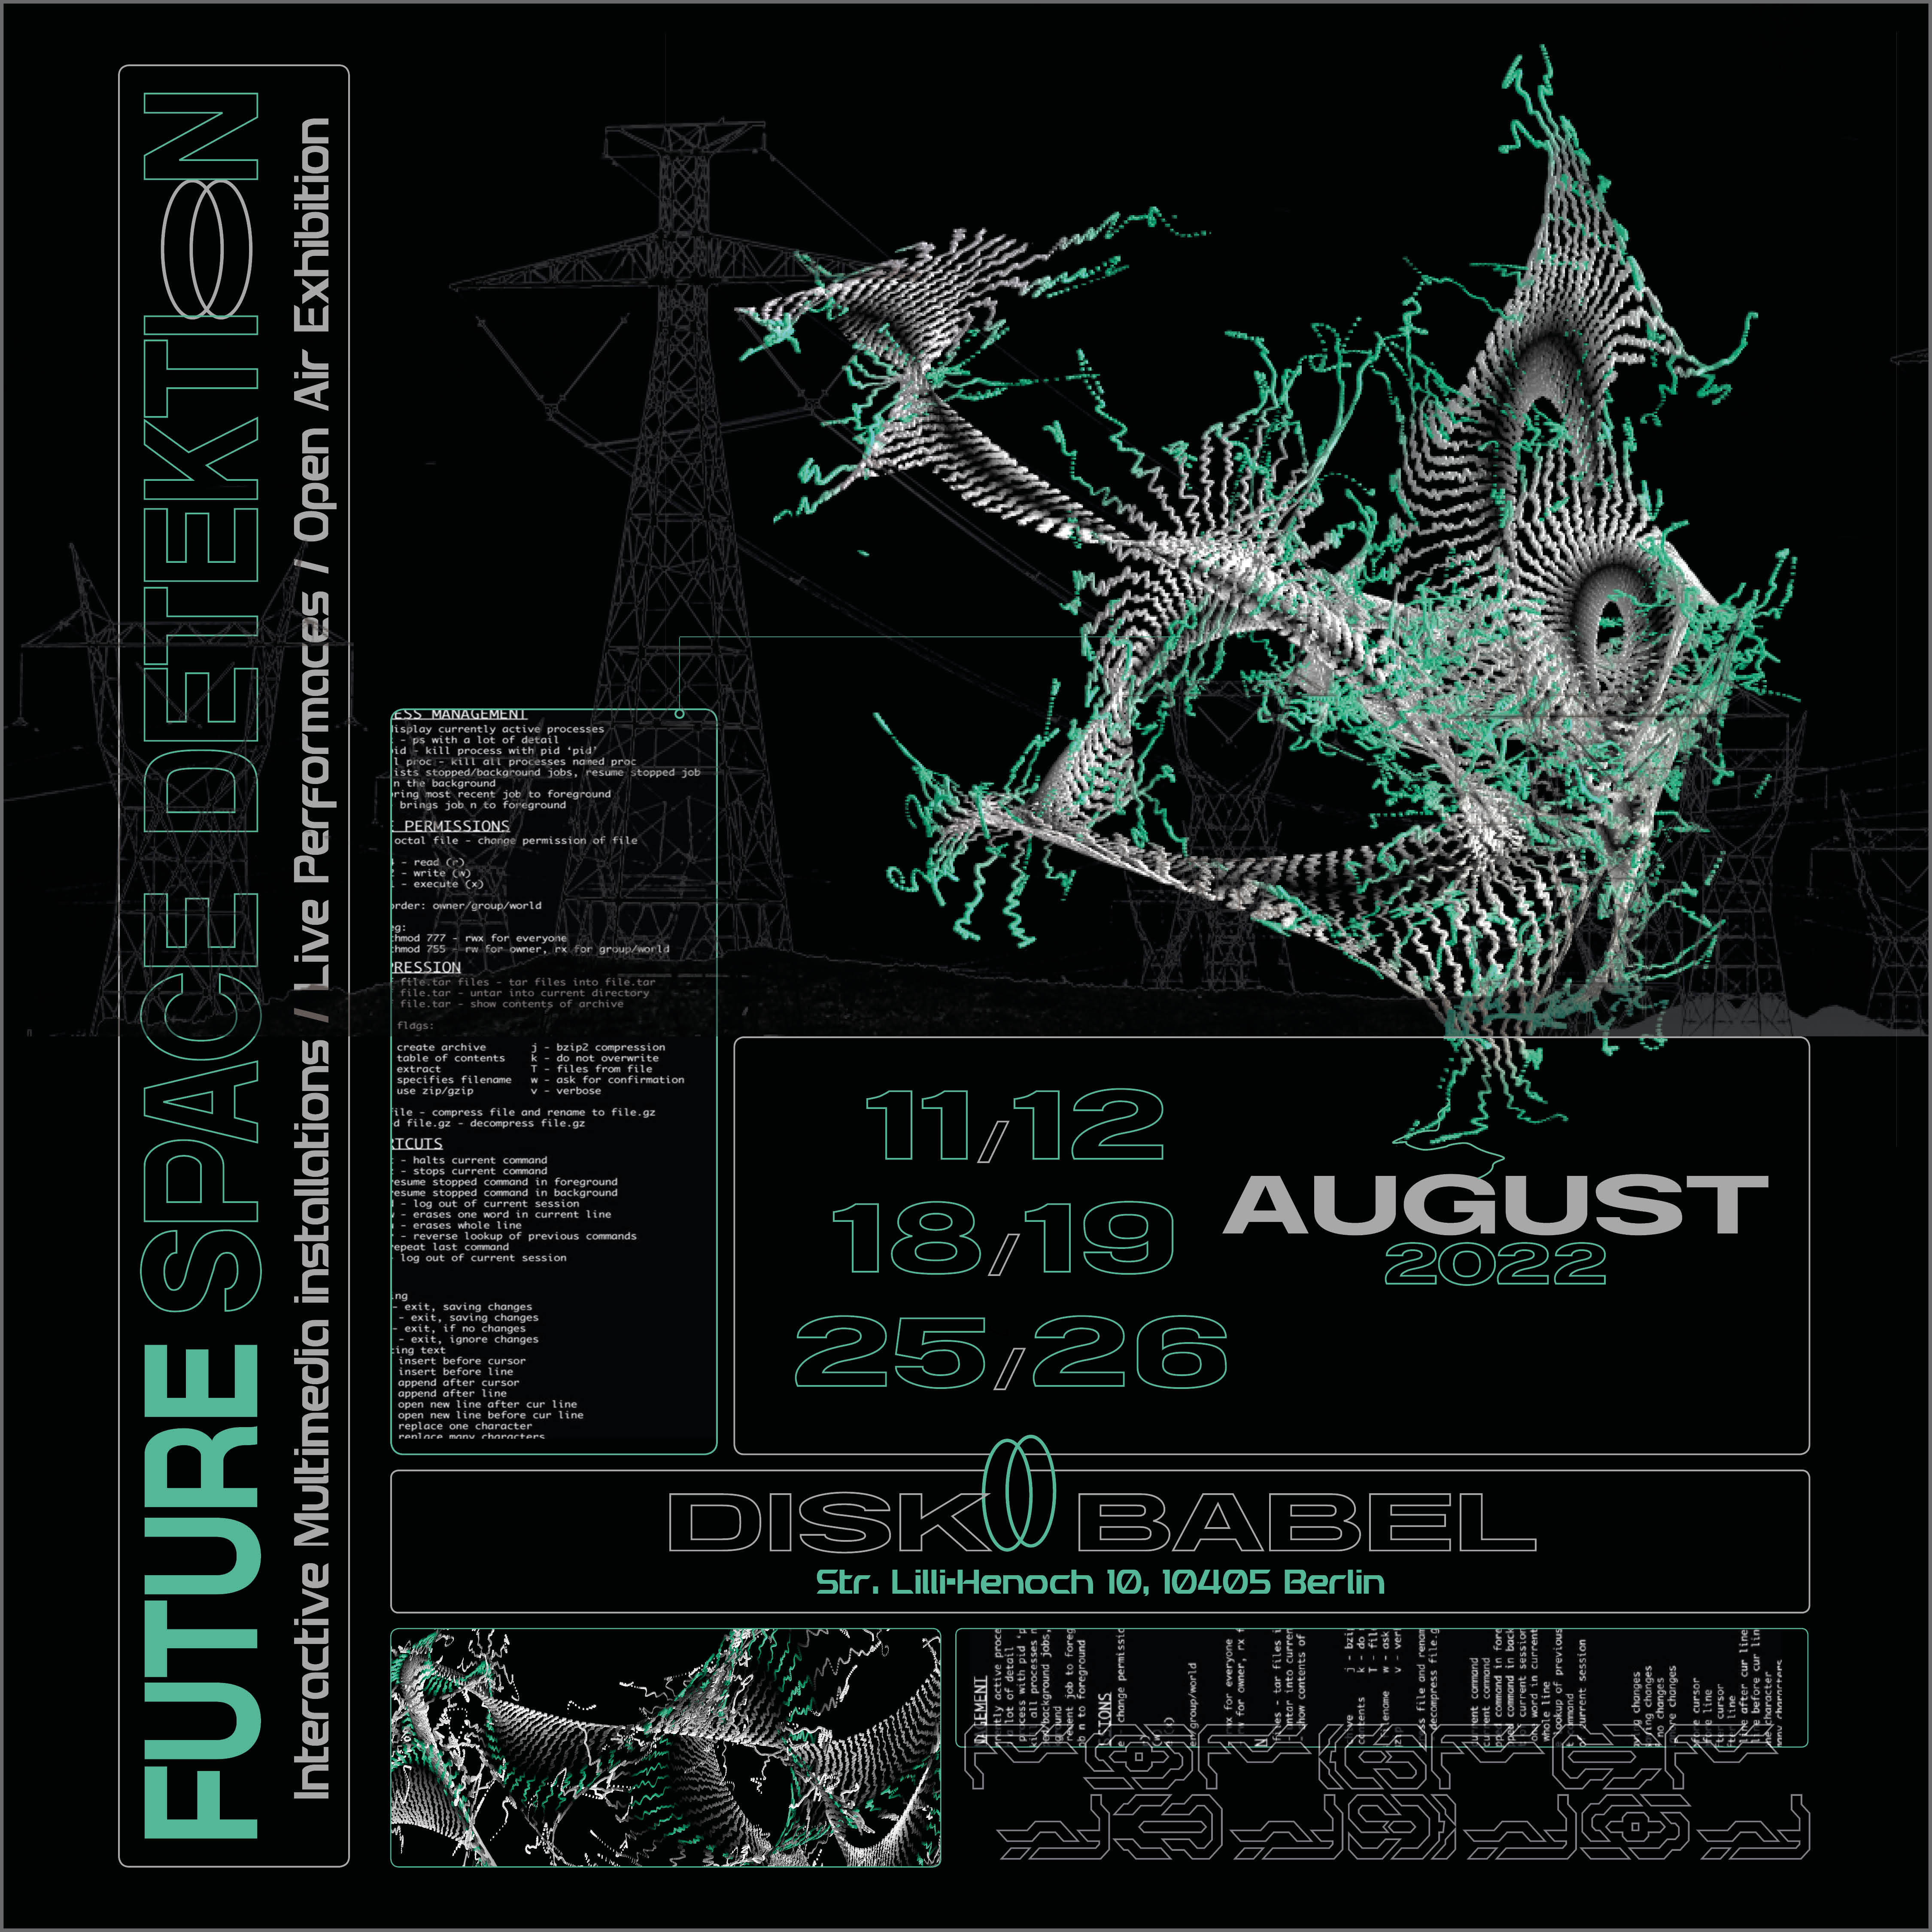 Future Space Detektion - Open Air  - Flyer front